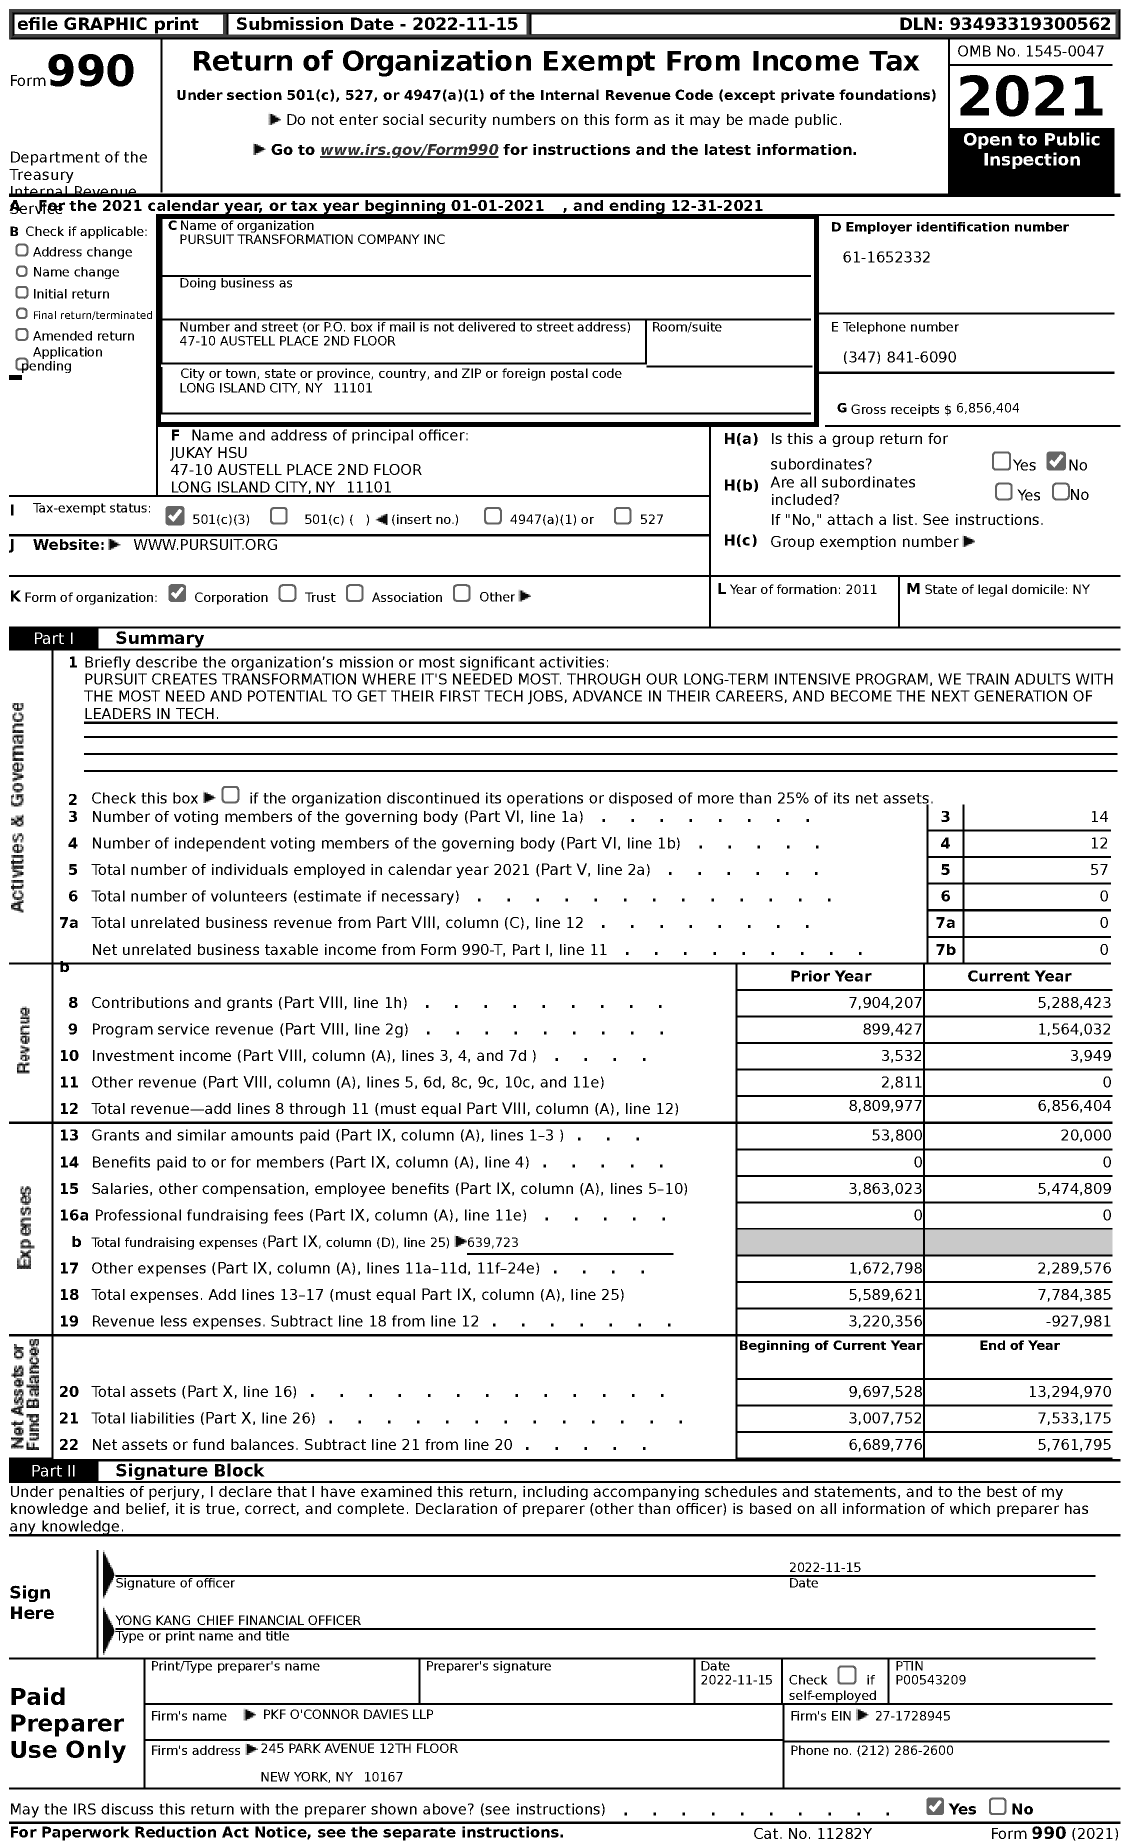 Image of first page of 2021 Form 990 for Pursuit Transformation Company